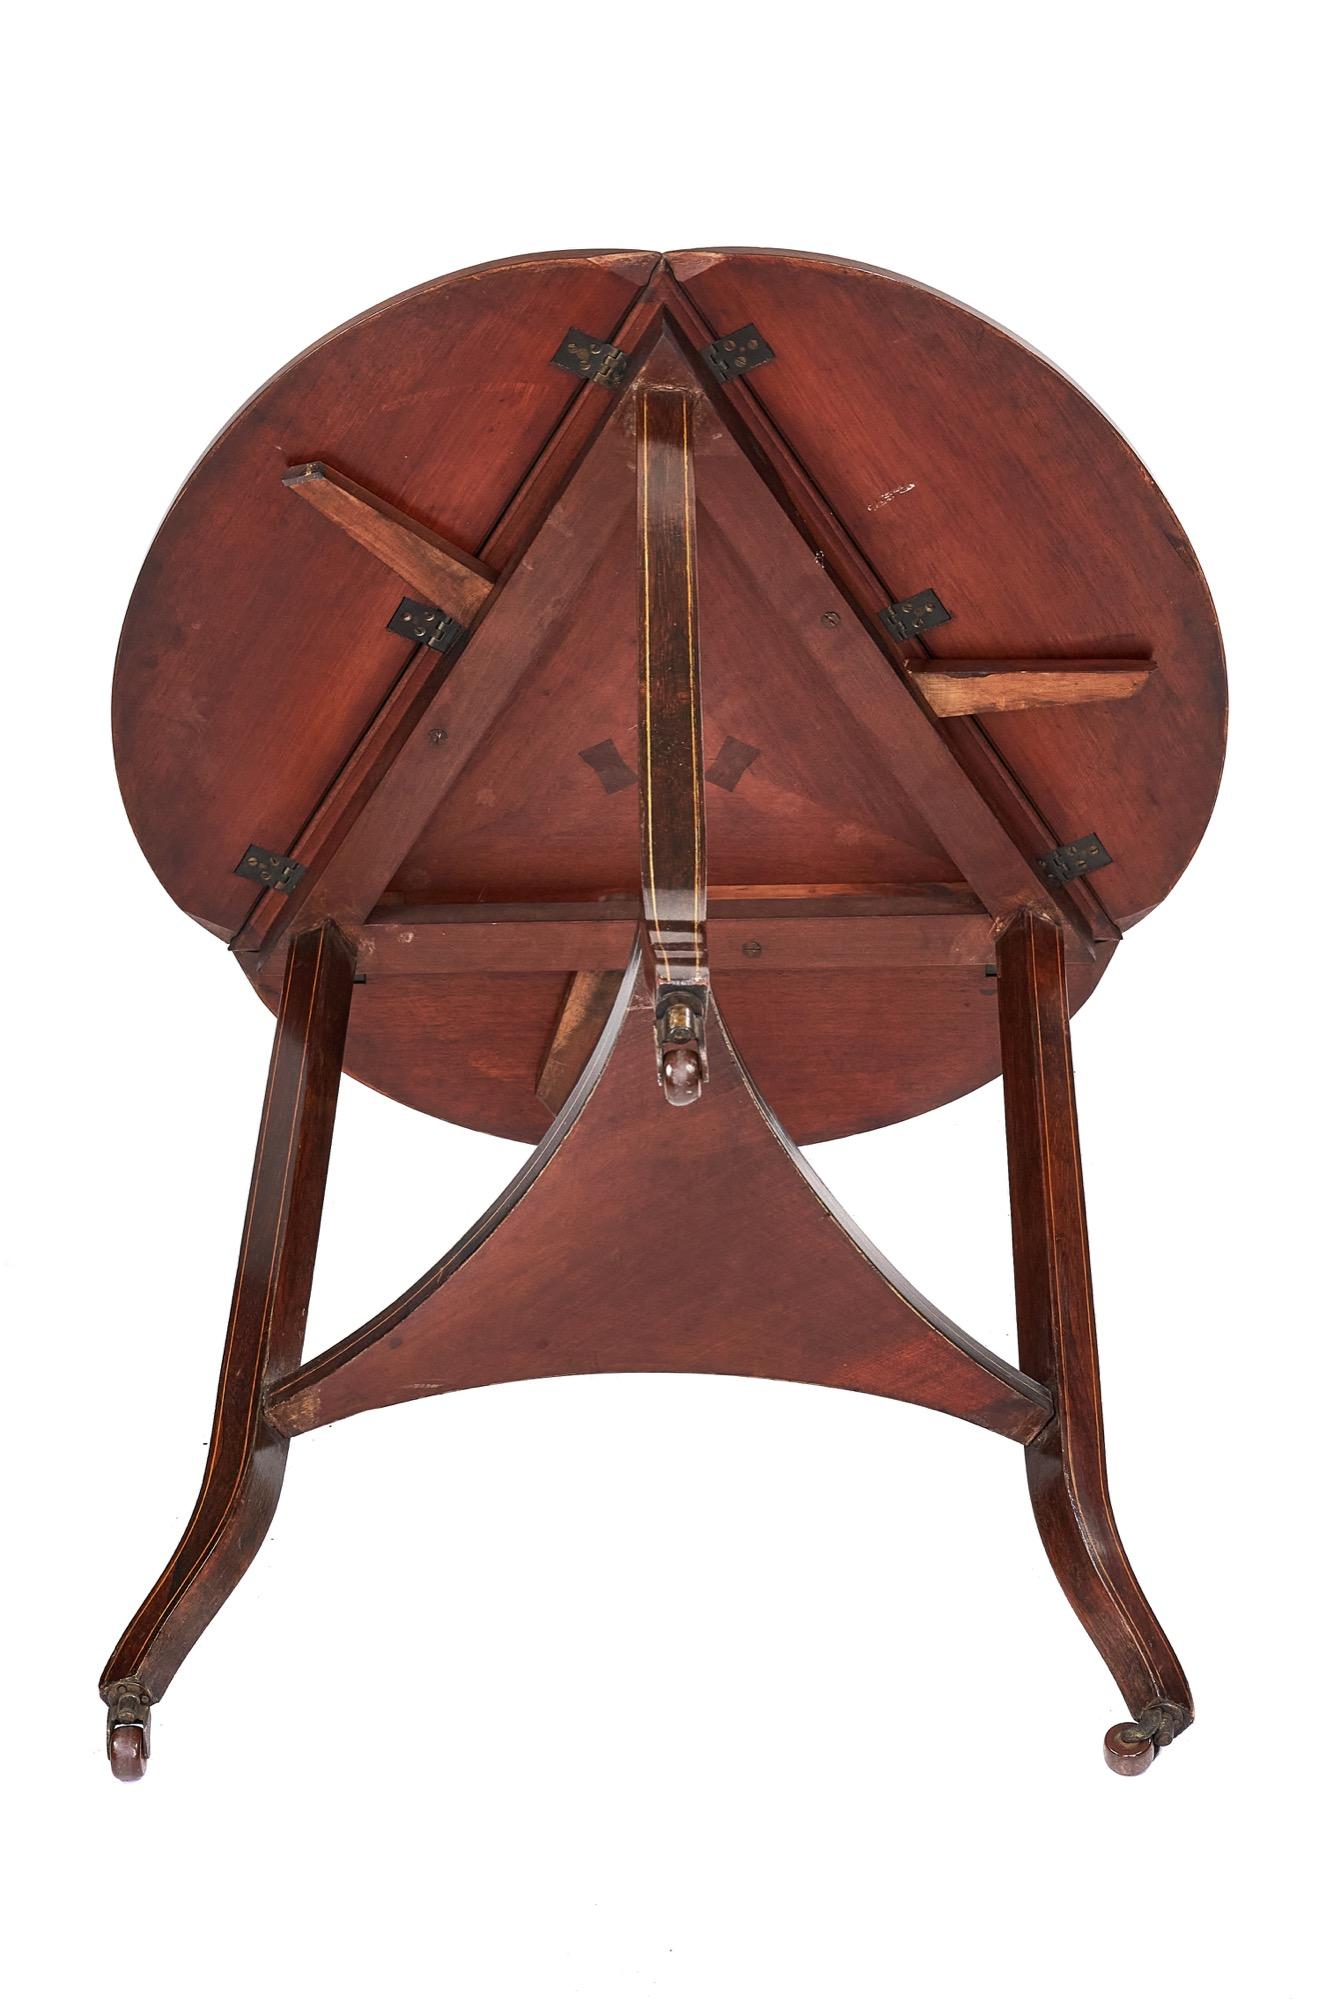 Fine Edwardian rosewood inlaid drop leaf table having an unusual triangular shape, the top boasts a pretty centre inlay with bone and satinwood decoration, the three drop leafs having the same delightful inlay depicting urns, foliage and scrolls.